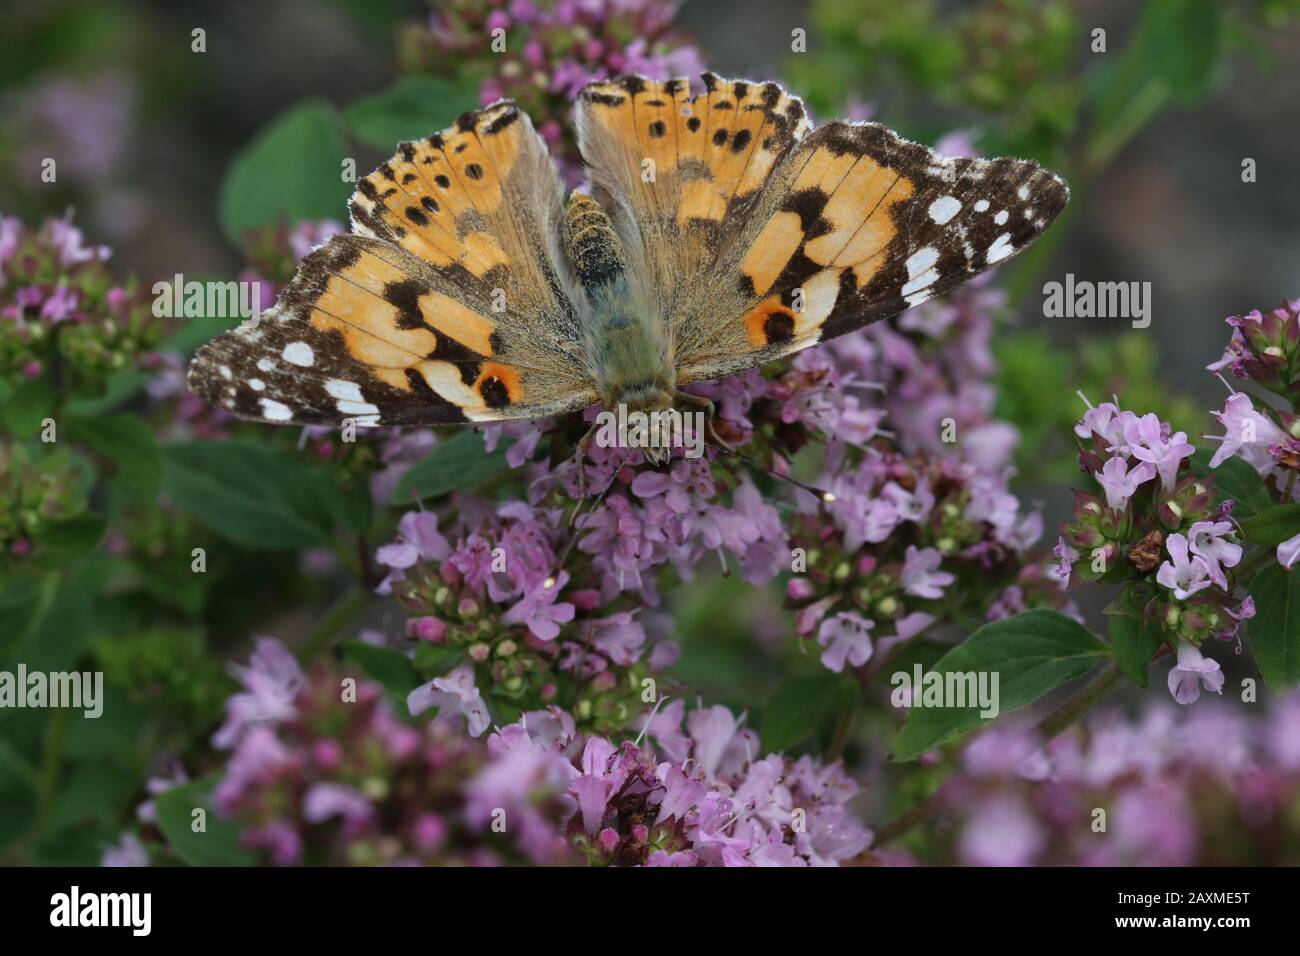 A Painted Lady butterfly (Vanessa cardui) nectaring on a purple or lilac flowers. Stock Photo